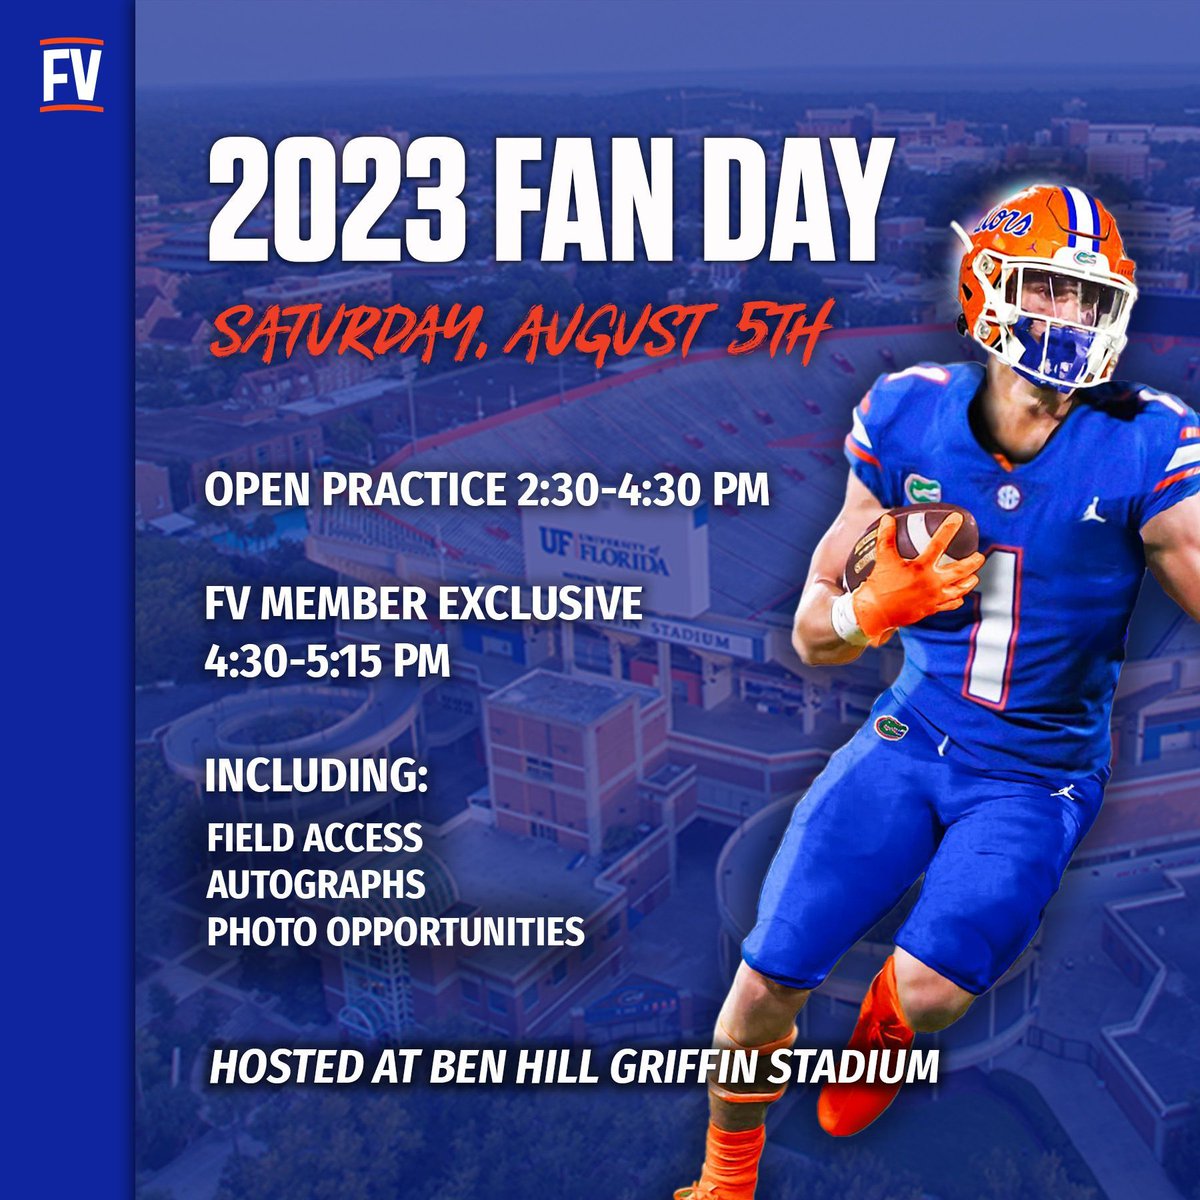 🏈Join us on August 5th, for an unforgettable day of @GatorsFB at an Open Practice session & exclusive for FV members, access to the field after for autographs and photo opportunities. For more information, RSVP, and updates check out your member dashboard! #FanFest2023